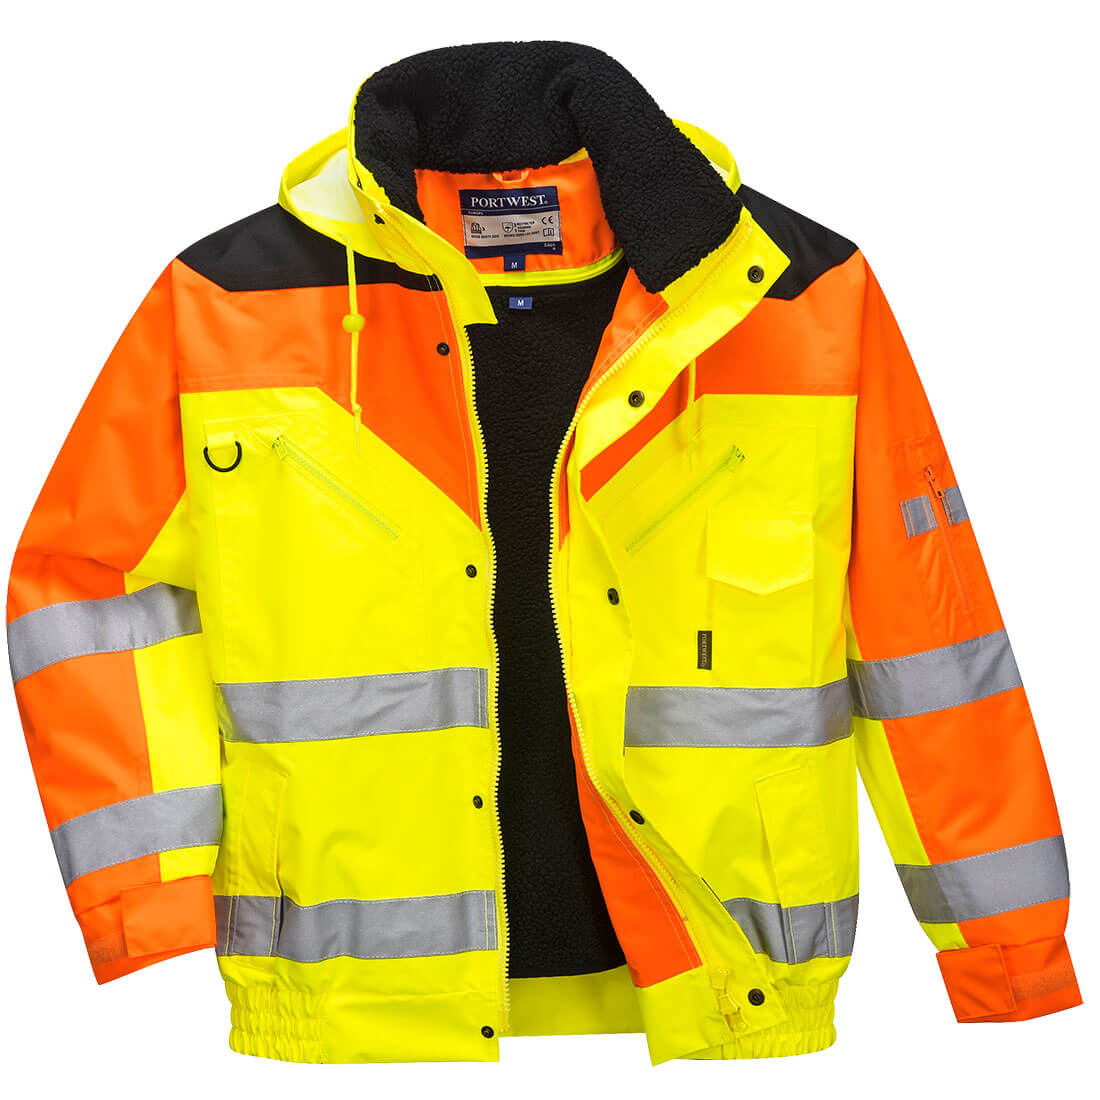 Contrast Plus Hi Vis Bomber Jacket and Detachable Lining Yellow L